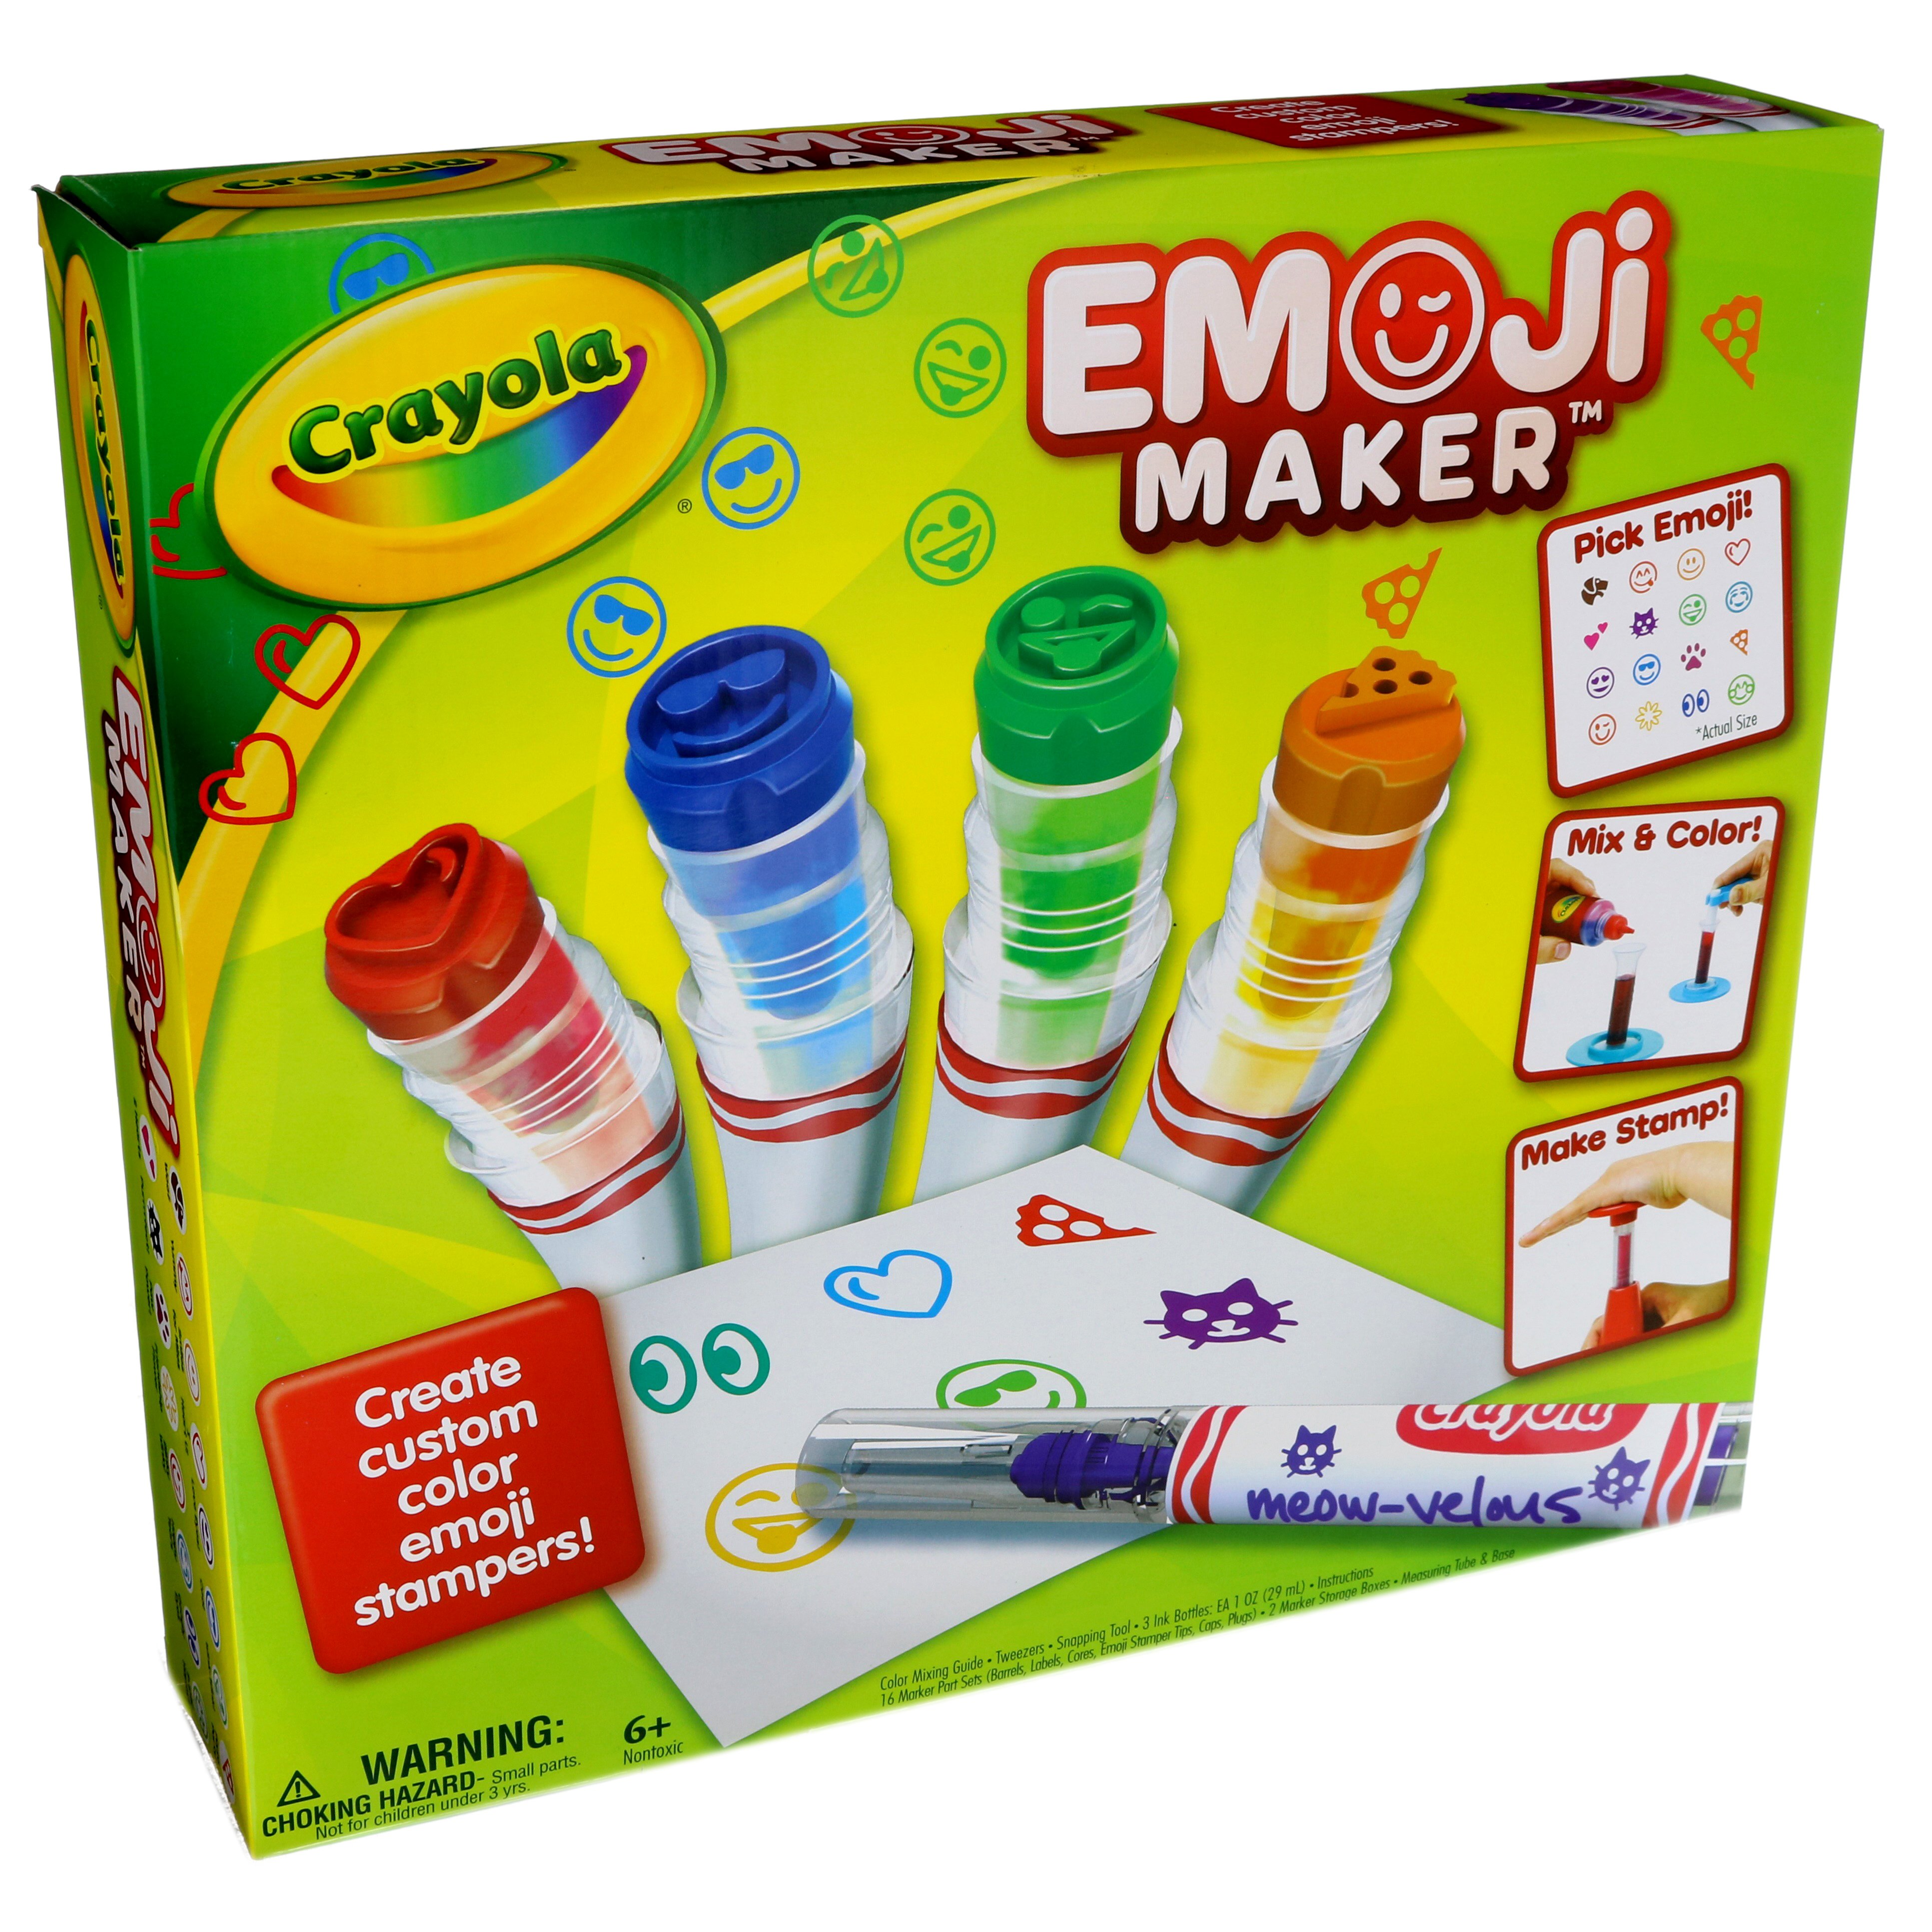 Make Your Own Markers with the Crayola Marker Maker